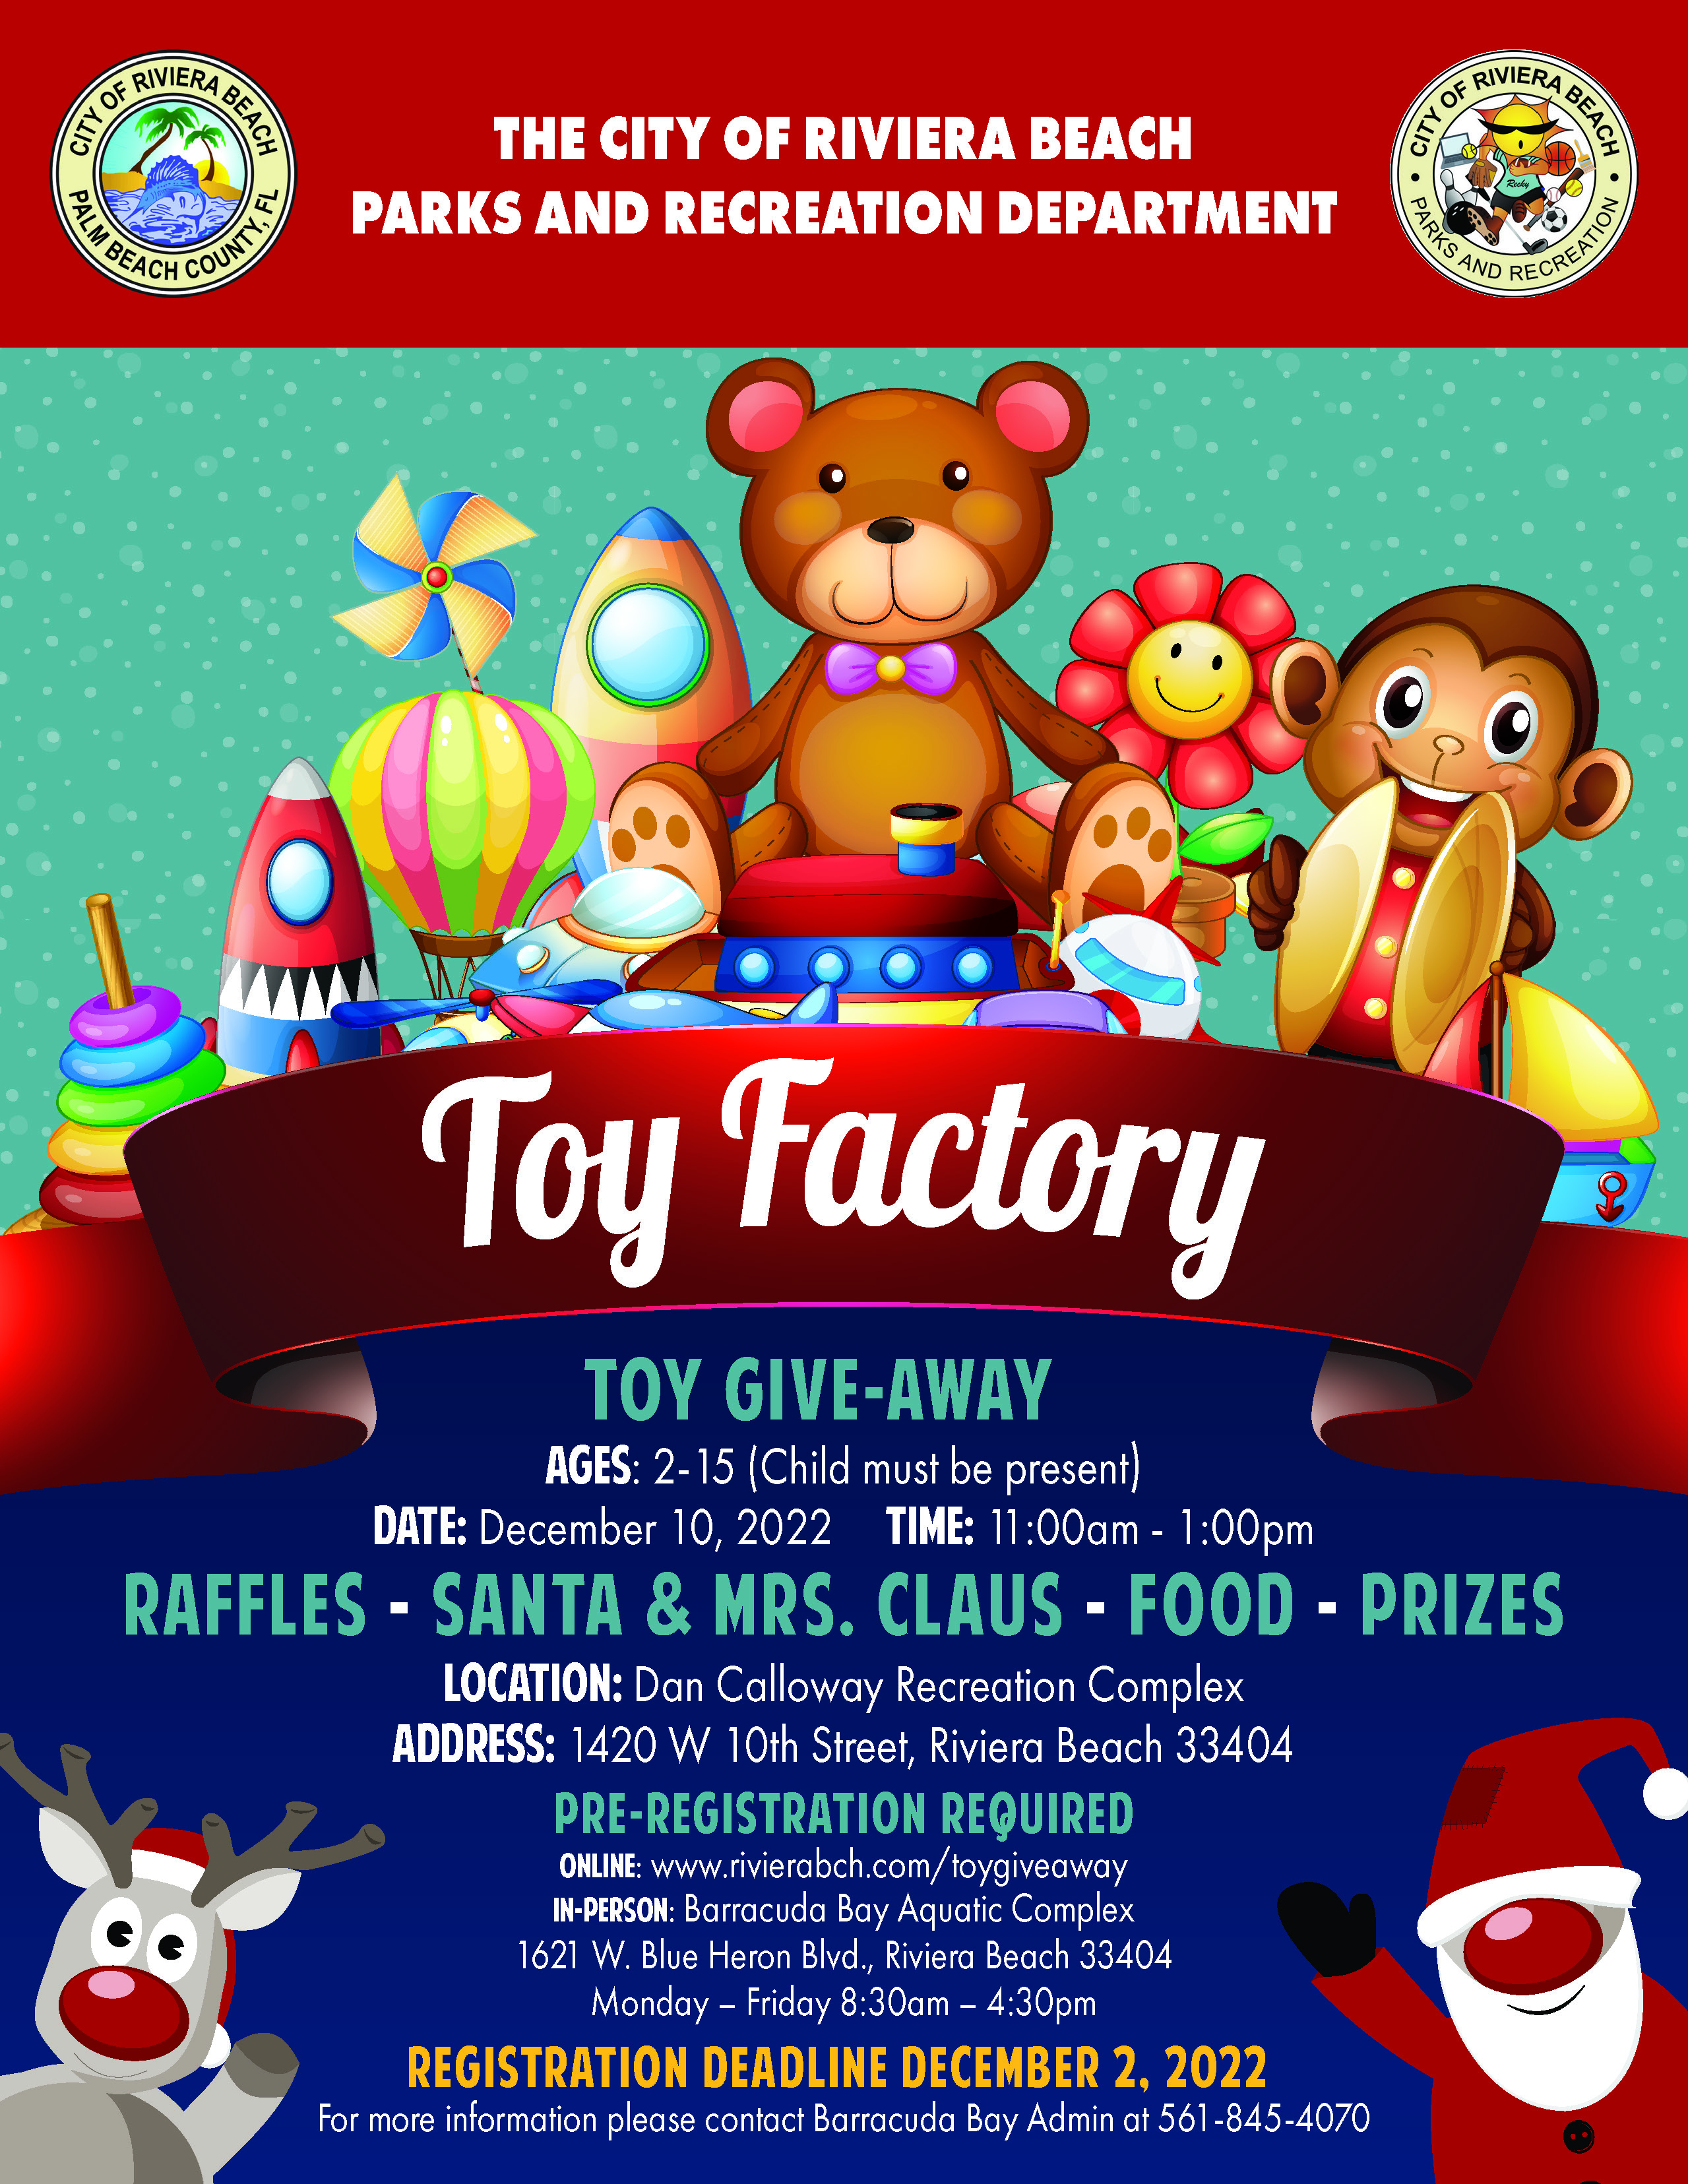 TOY GIVE-AWAY AGES: 2-15 (Child must be present) DATE: December 10, 2022 TIME: 11:00am - 1:00pm RAFFLES - SANTA & MRS. CLAUS - FOOD - PRIZES LOCATION: Dan Calloway Recreation Complex ADDRESS: 1420 W 10th Street, Riviera Beach 33404 PRE-REGISTRATION REQUIRED Barracuda Bay Aquatic Complex 1621 W. Blue Heron Blvd., Riviera Beach 33404 Monday - Friday 8:30am - 4:30pm REGISTRATION DEADLINE DECEMBER 2, 2022 For more intormation please contact Barracuda Bay Admin at 561-845-4070